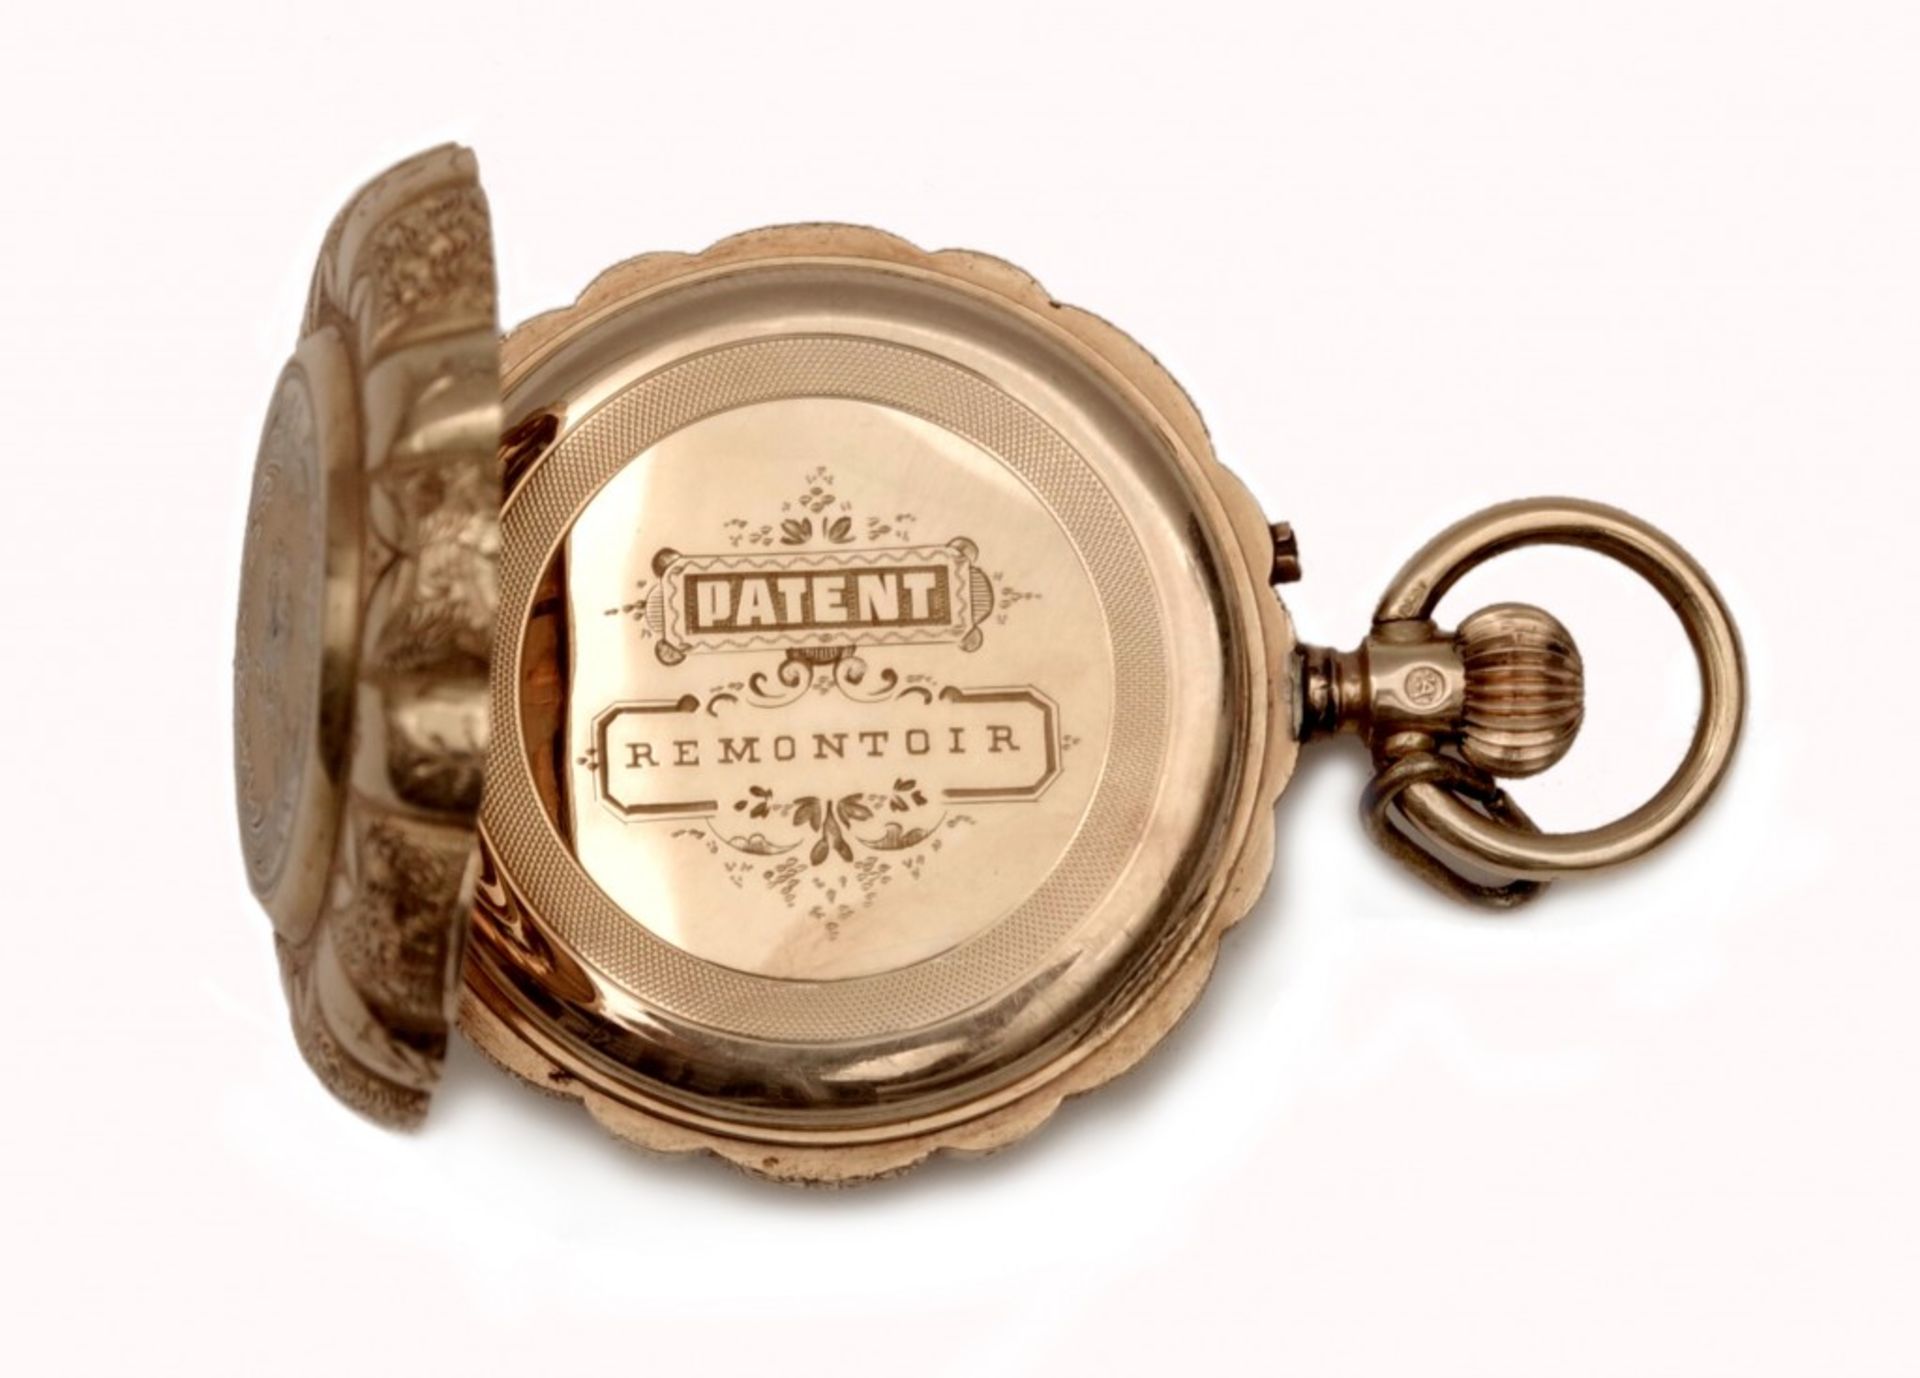 A Lady´s Gold Enamel Pocket Watch with Cylinder Escapement - Image 3 of 5